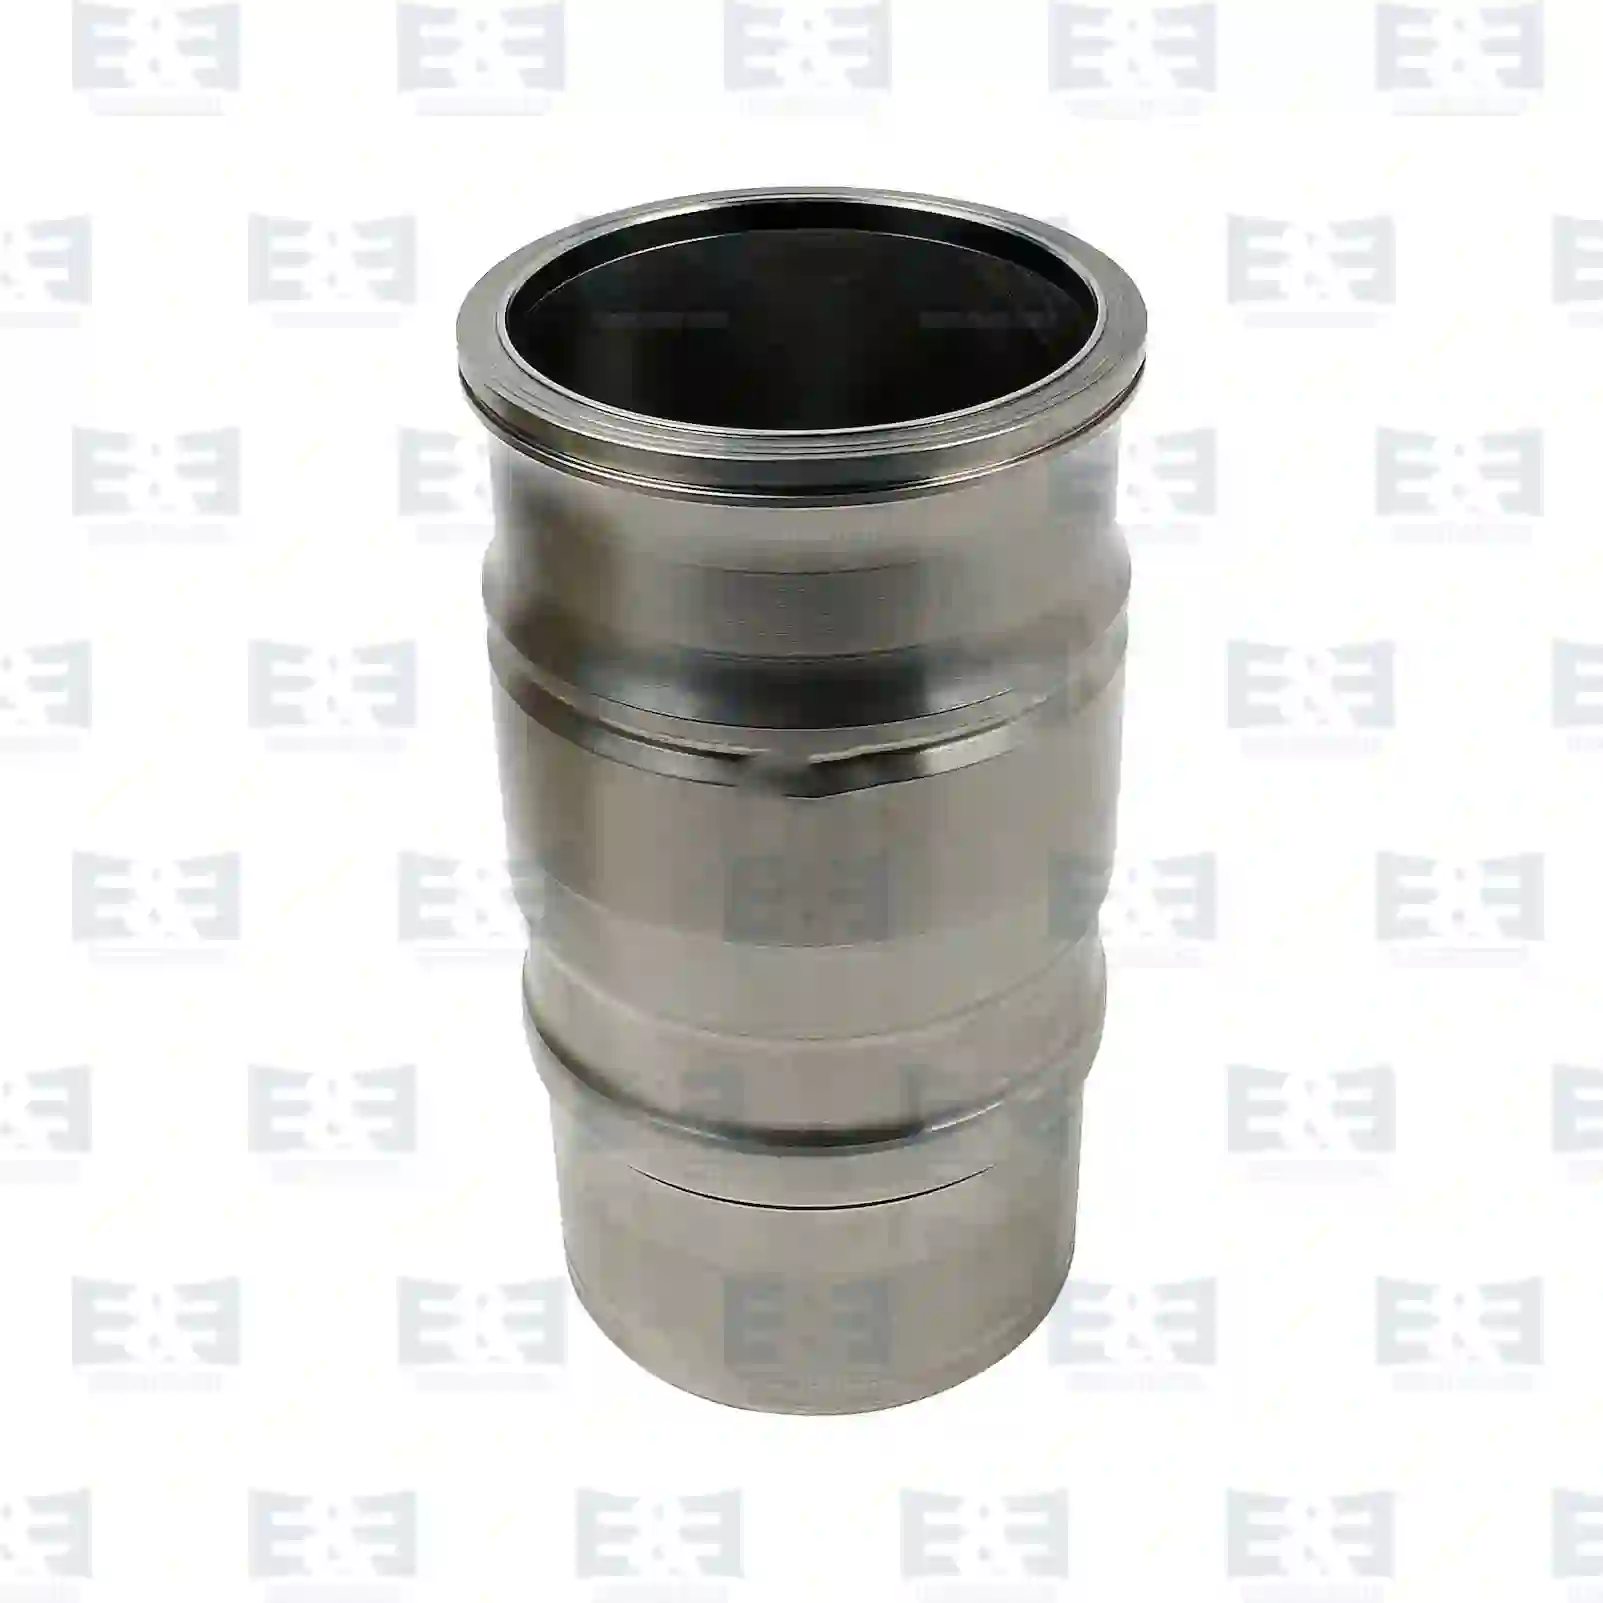 Cylinder liner, without seal rings, 2E2207936, 1382183, 1461895, 1484492, 1487775, 1868157, ZG01075-0008 ||  2E2207936 E&E Truck Spare Parts | Truck Spare Parts, Auotomotive Spare Parts Cylinder liner, without seal rings, 2E2207936, 1382183, 1461895, 1484492, 1487775, 1868157, ZG01075-0008 ||  2E2207936 E&E Truck Spare Parts | Truck Spare Parts, Auotomotive Spare Parts